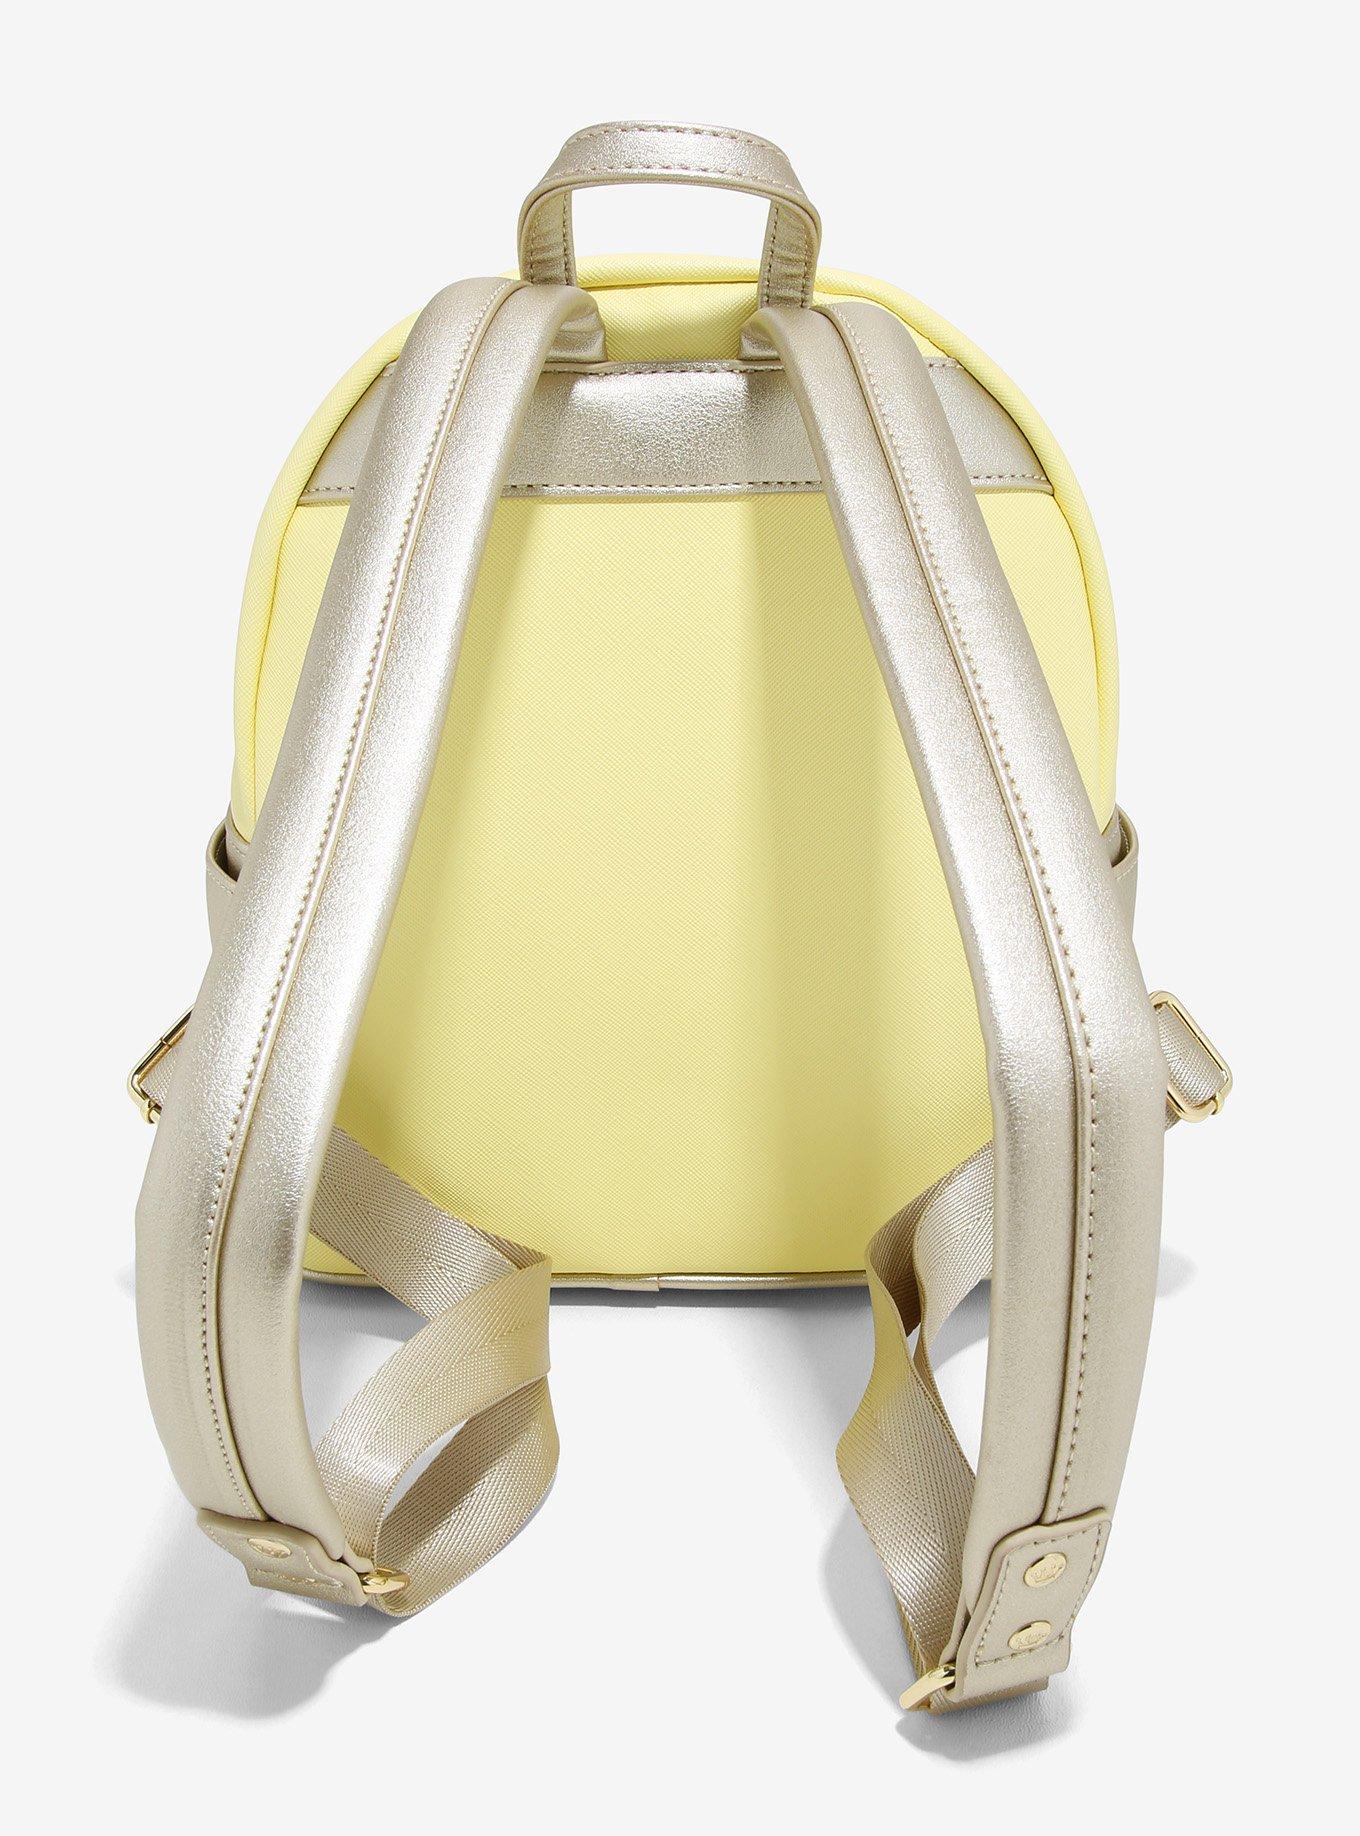 Loungefly Disney Beauty and the Beast Ballroom Sketch Mini Backpack -  BoxLunch Exclusive, BoxLunch